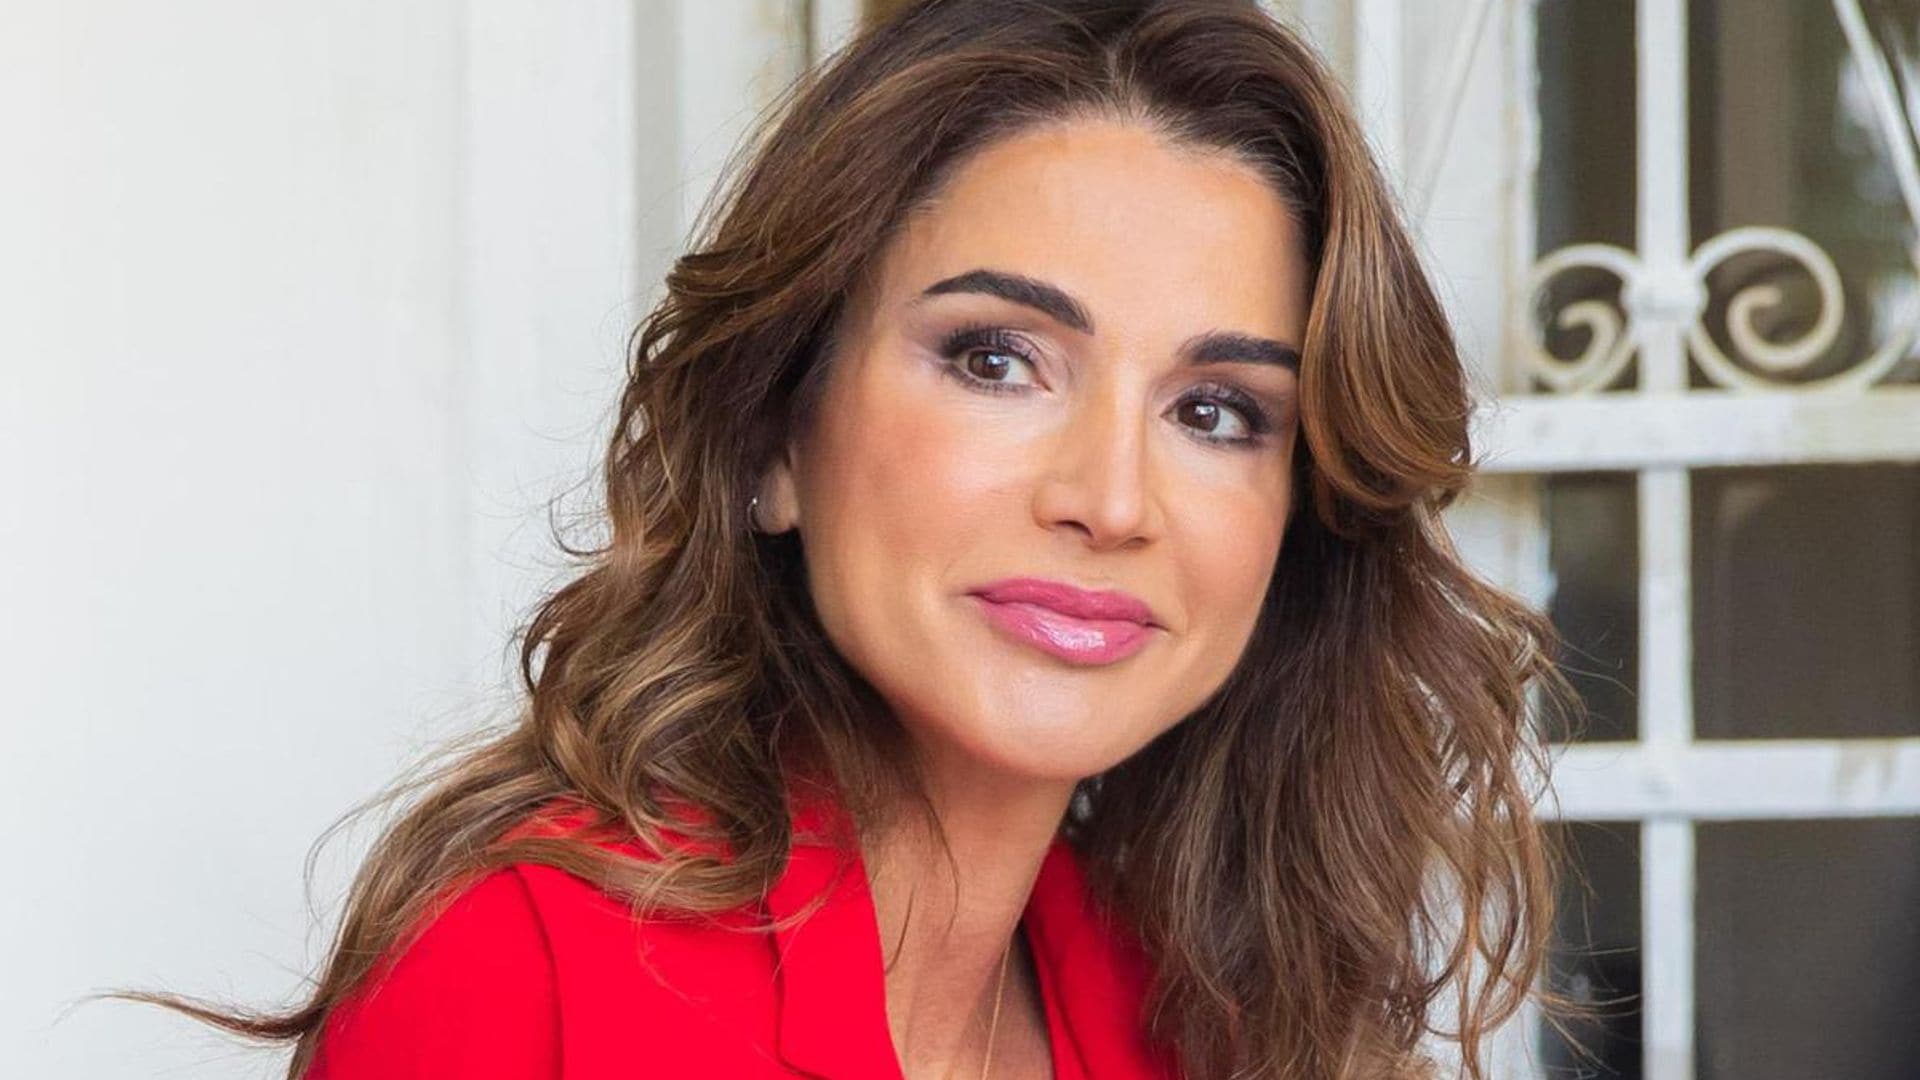 Queen Rania of Jordan celebrates Mother’s Day with sweet photo